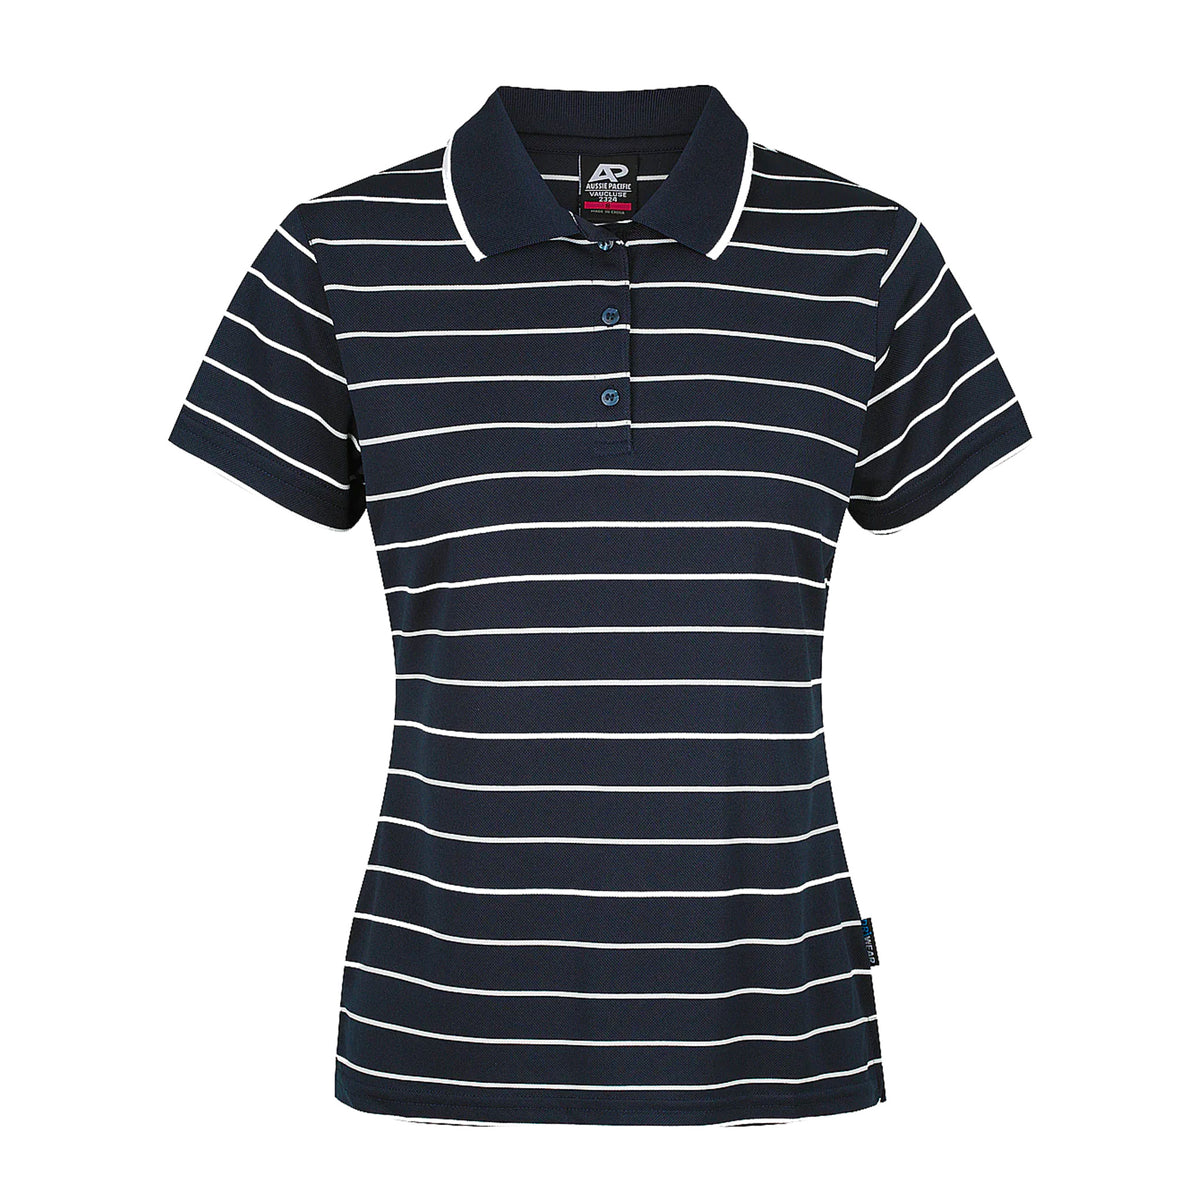 aussie pacific vaucluse ladies polo in navy white